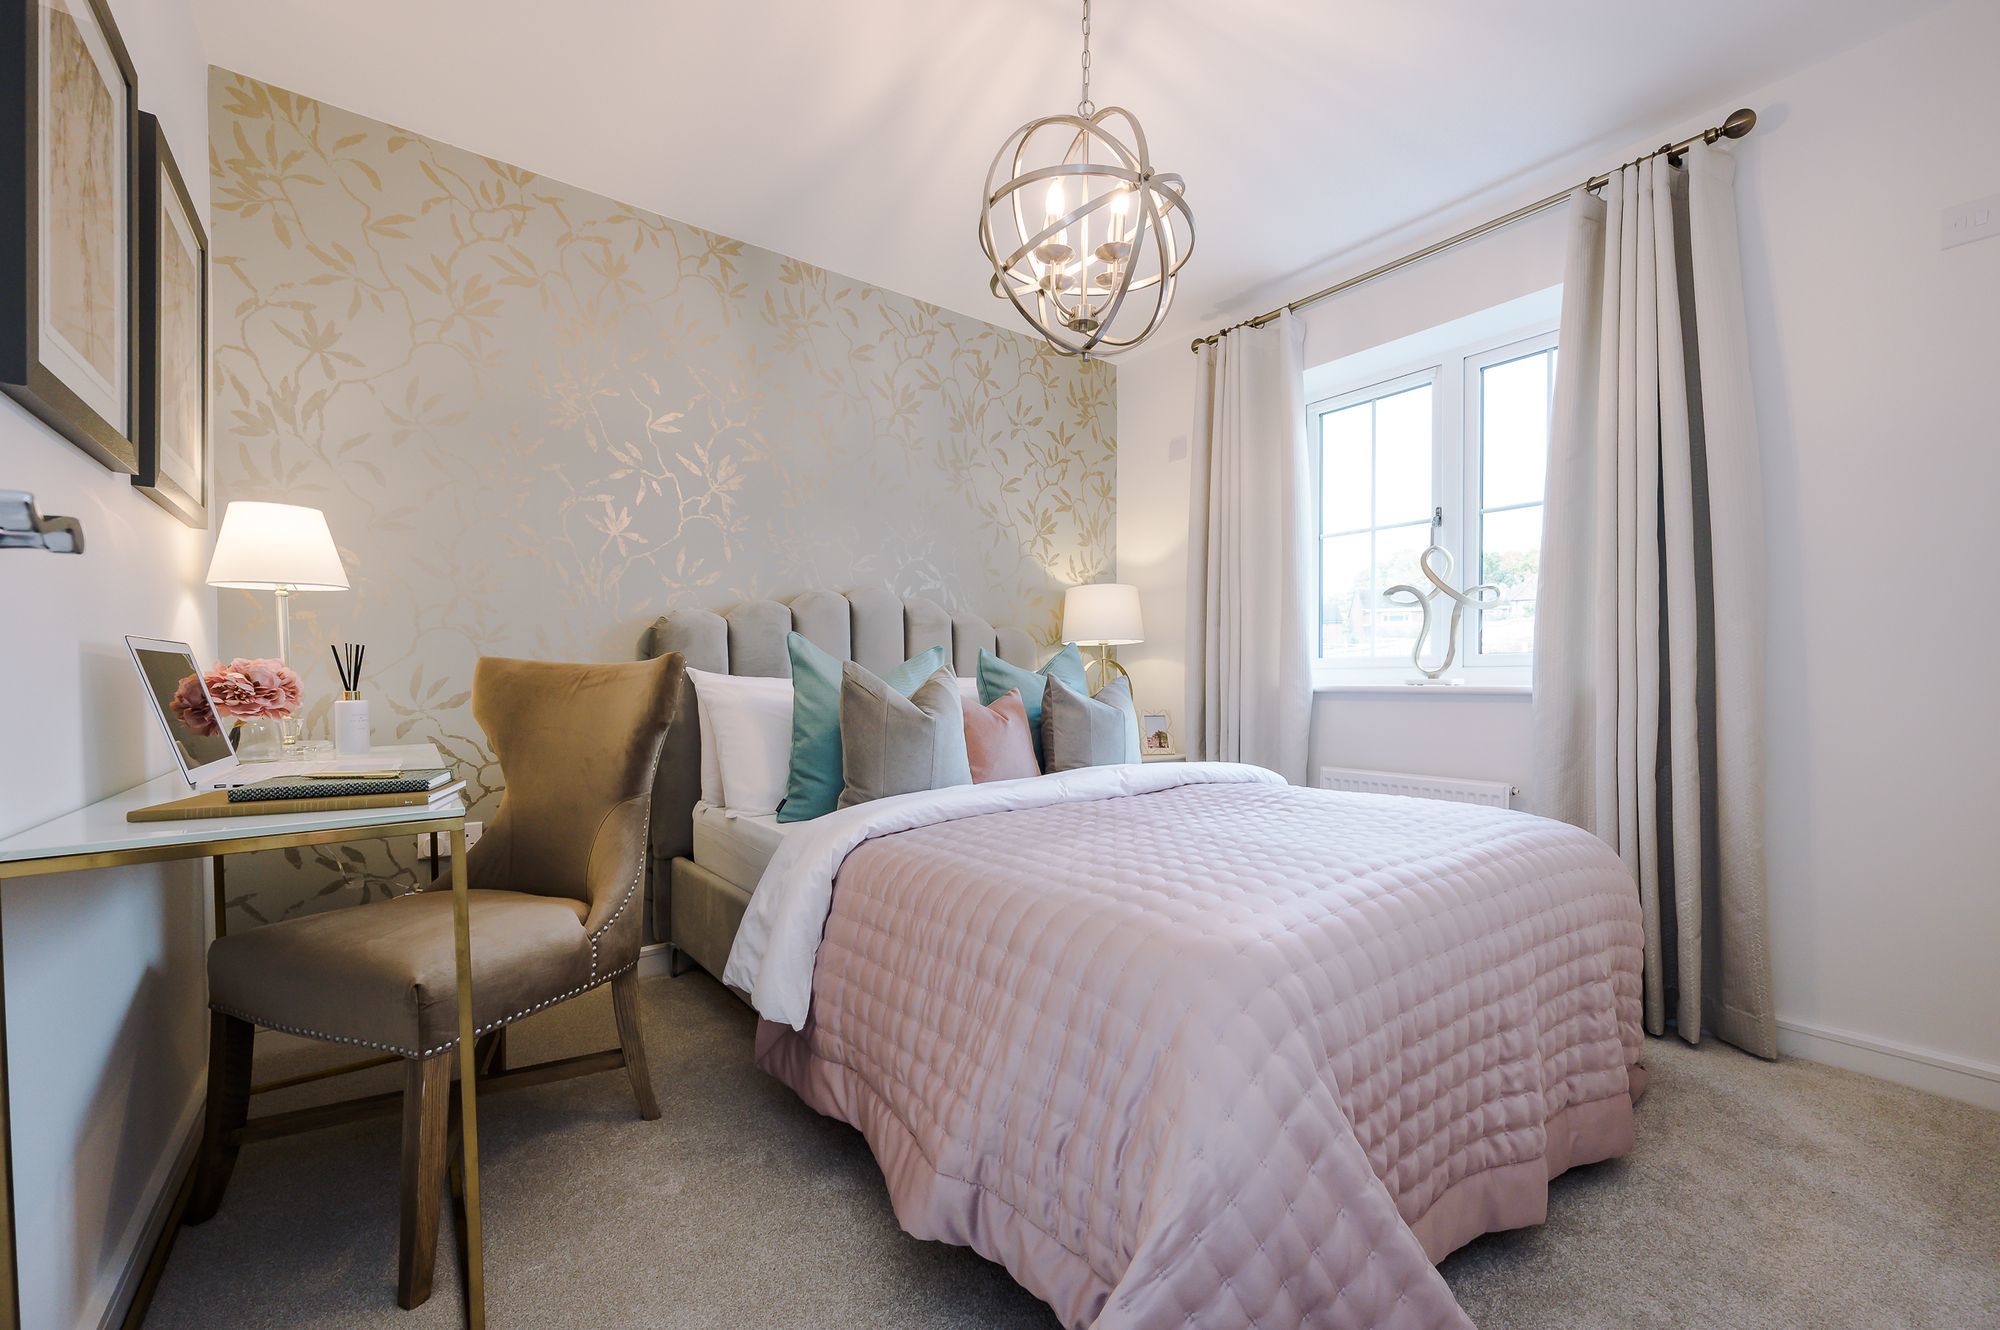 An example of a spare bedroom in the new Elan homes at The Hyde, Kinver